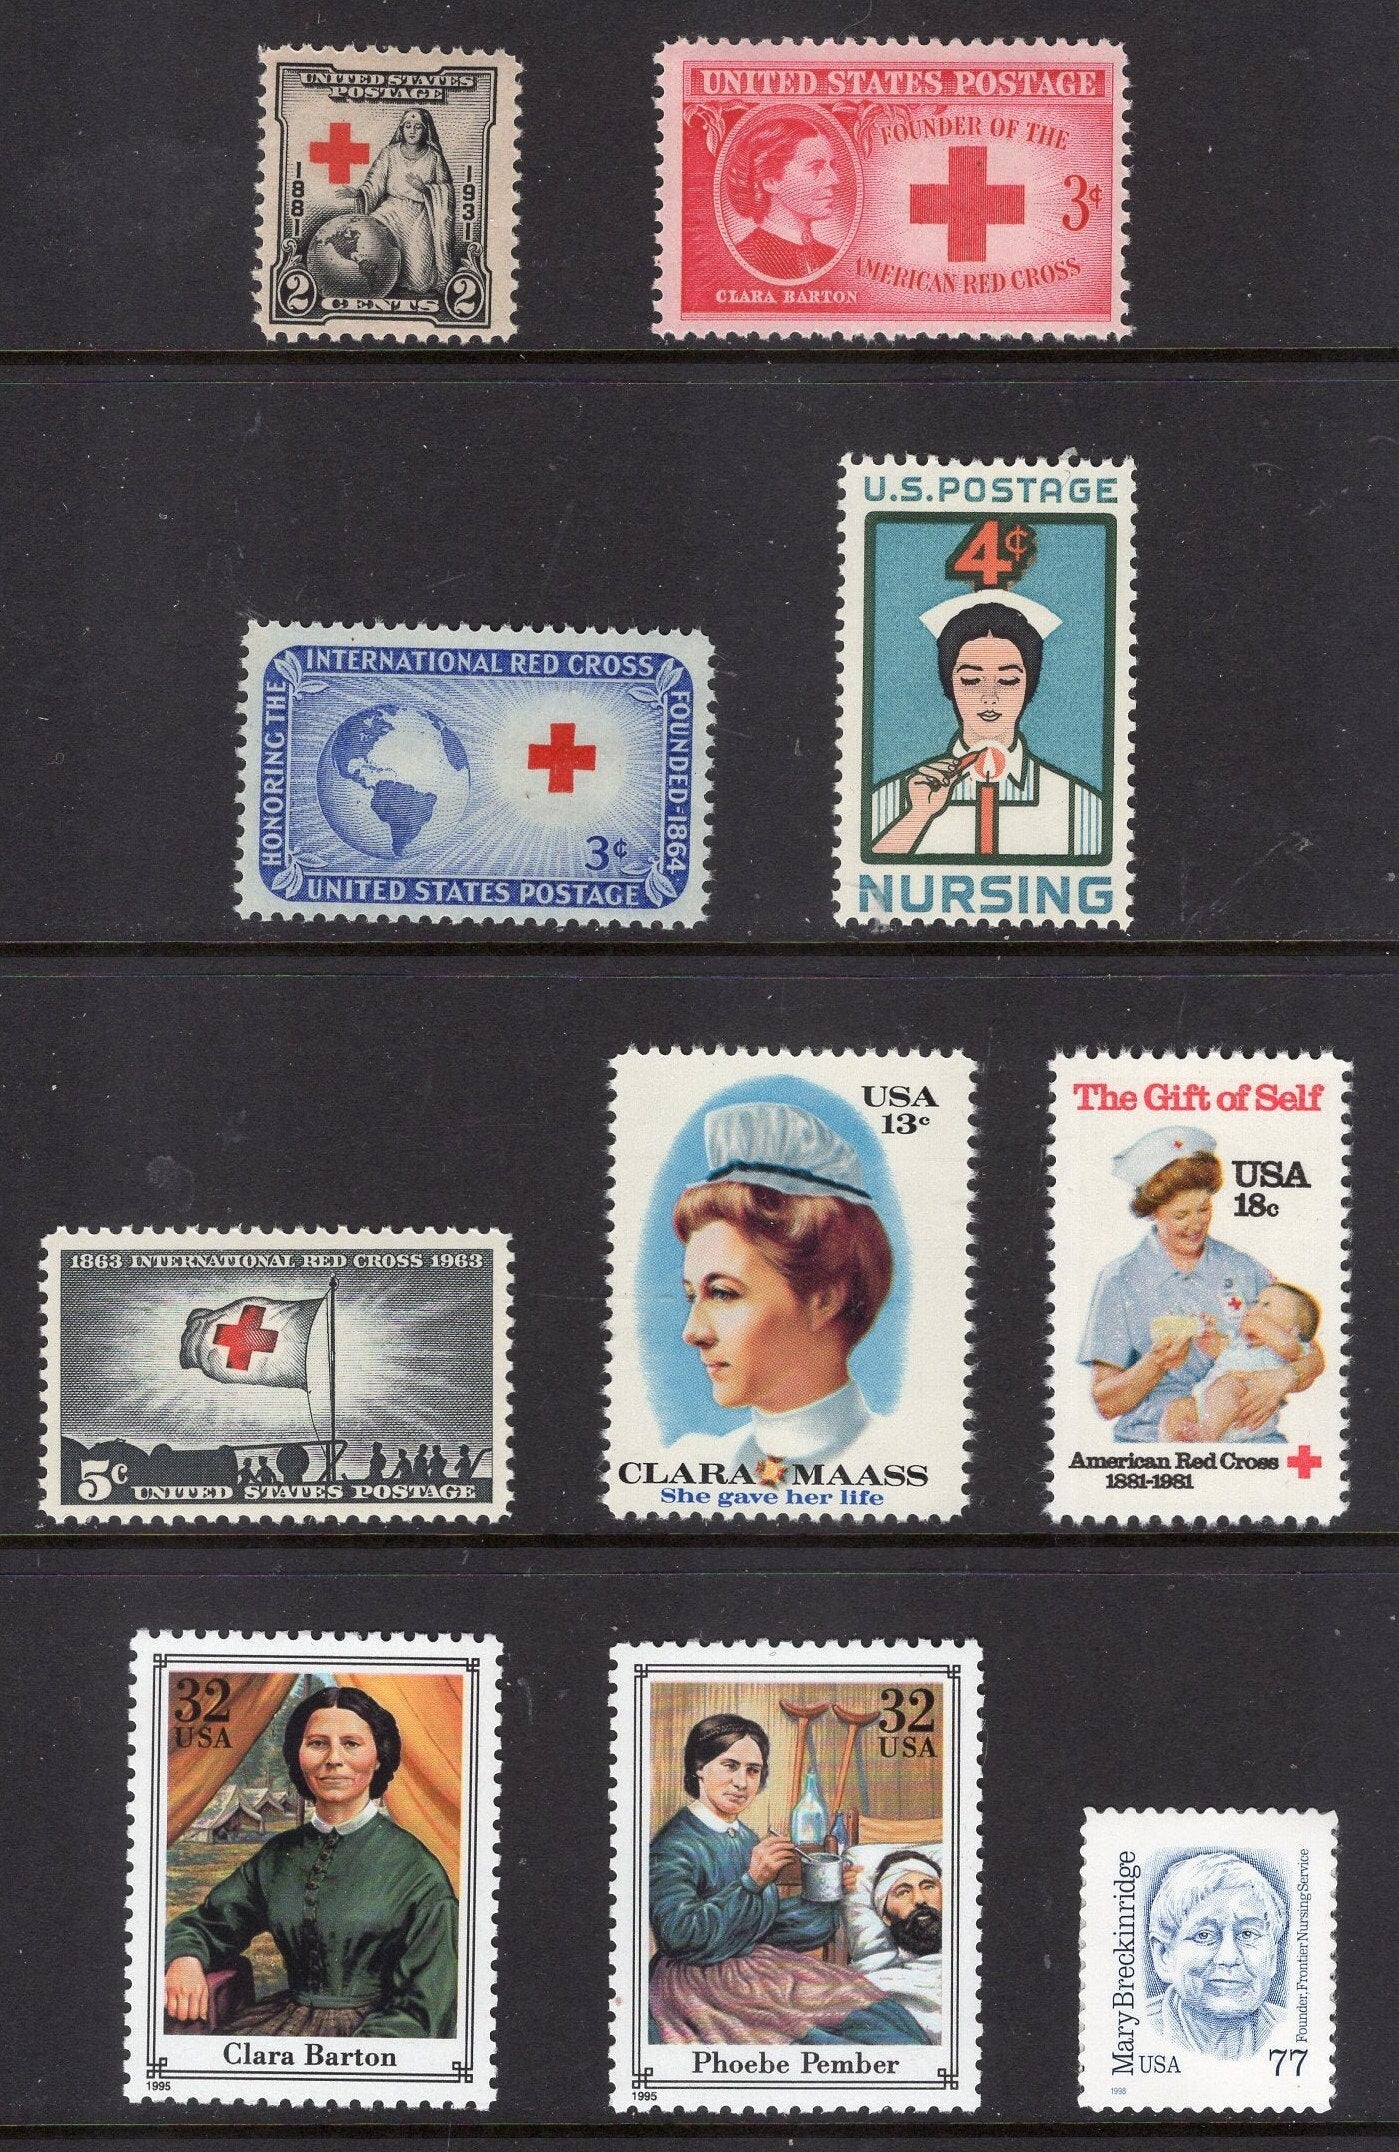 1 NURSING 10 Stamp ADVANCED Red Cross Collection - Bright, fresh mint US Postage Stamps - 1931-98 s702//2975r -